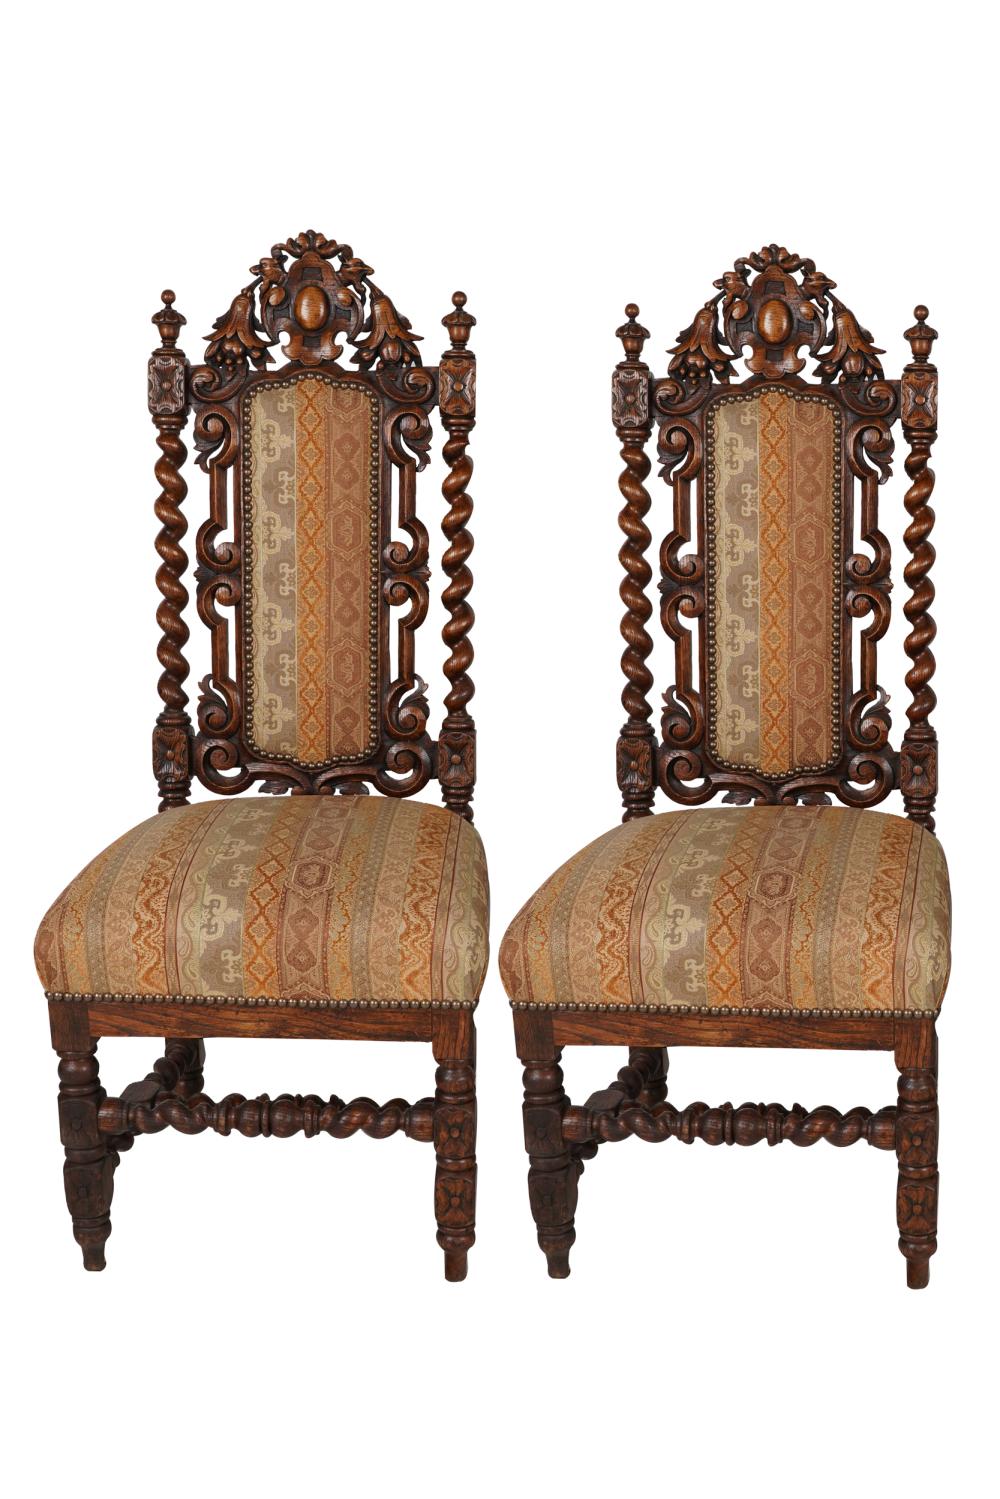 PAIR OF JACOBEAN STYLE CARVED OAK